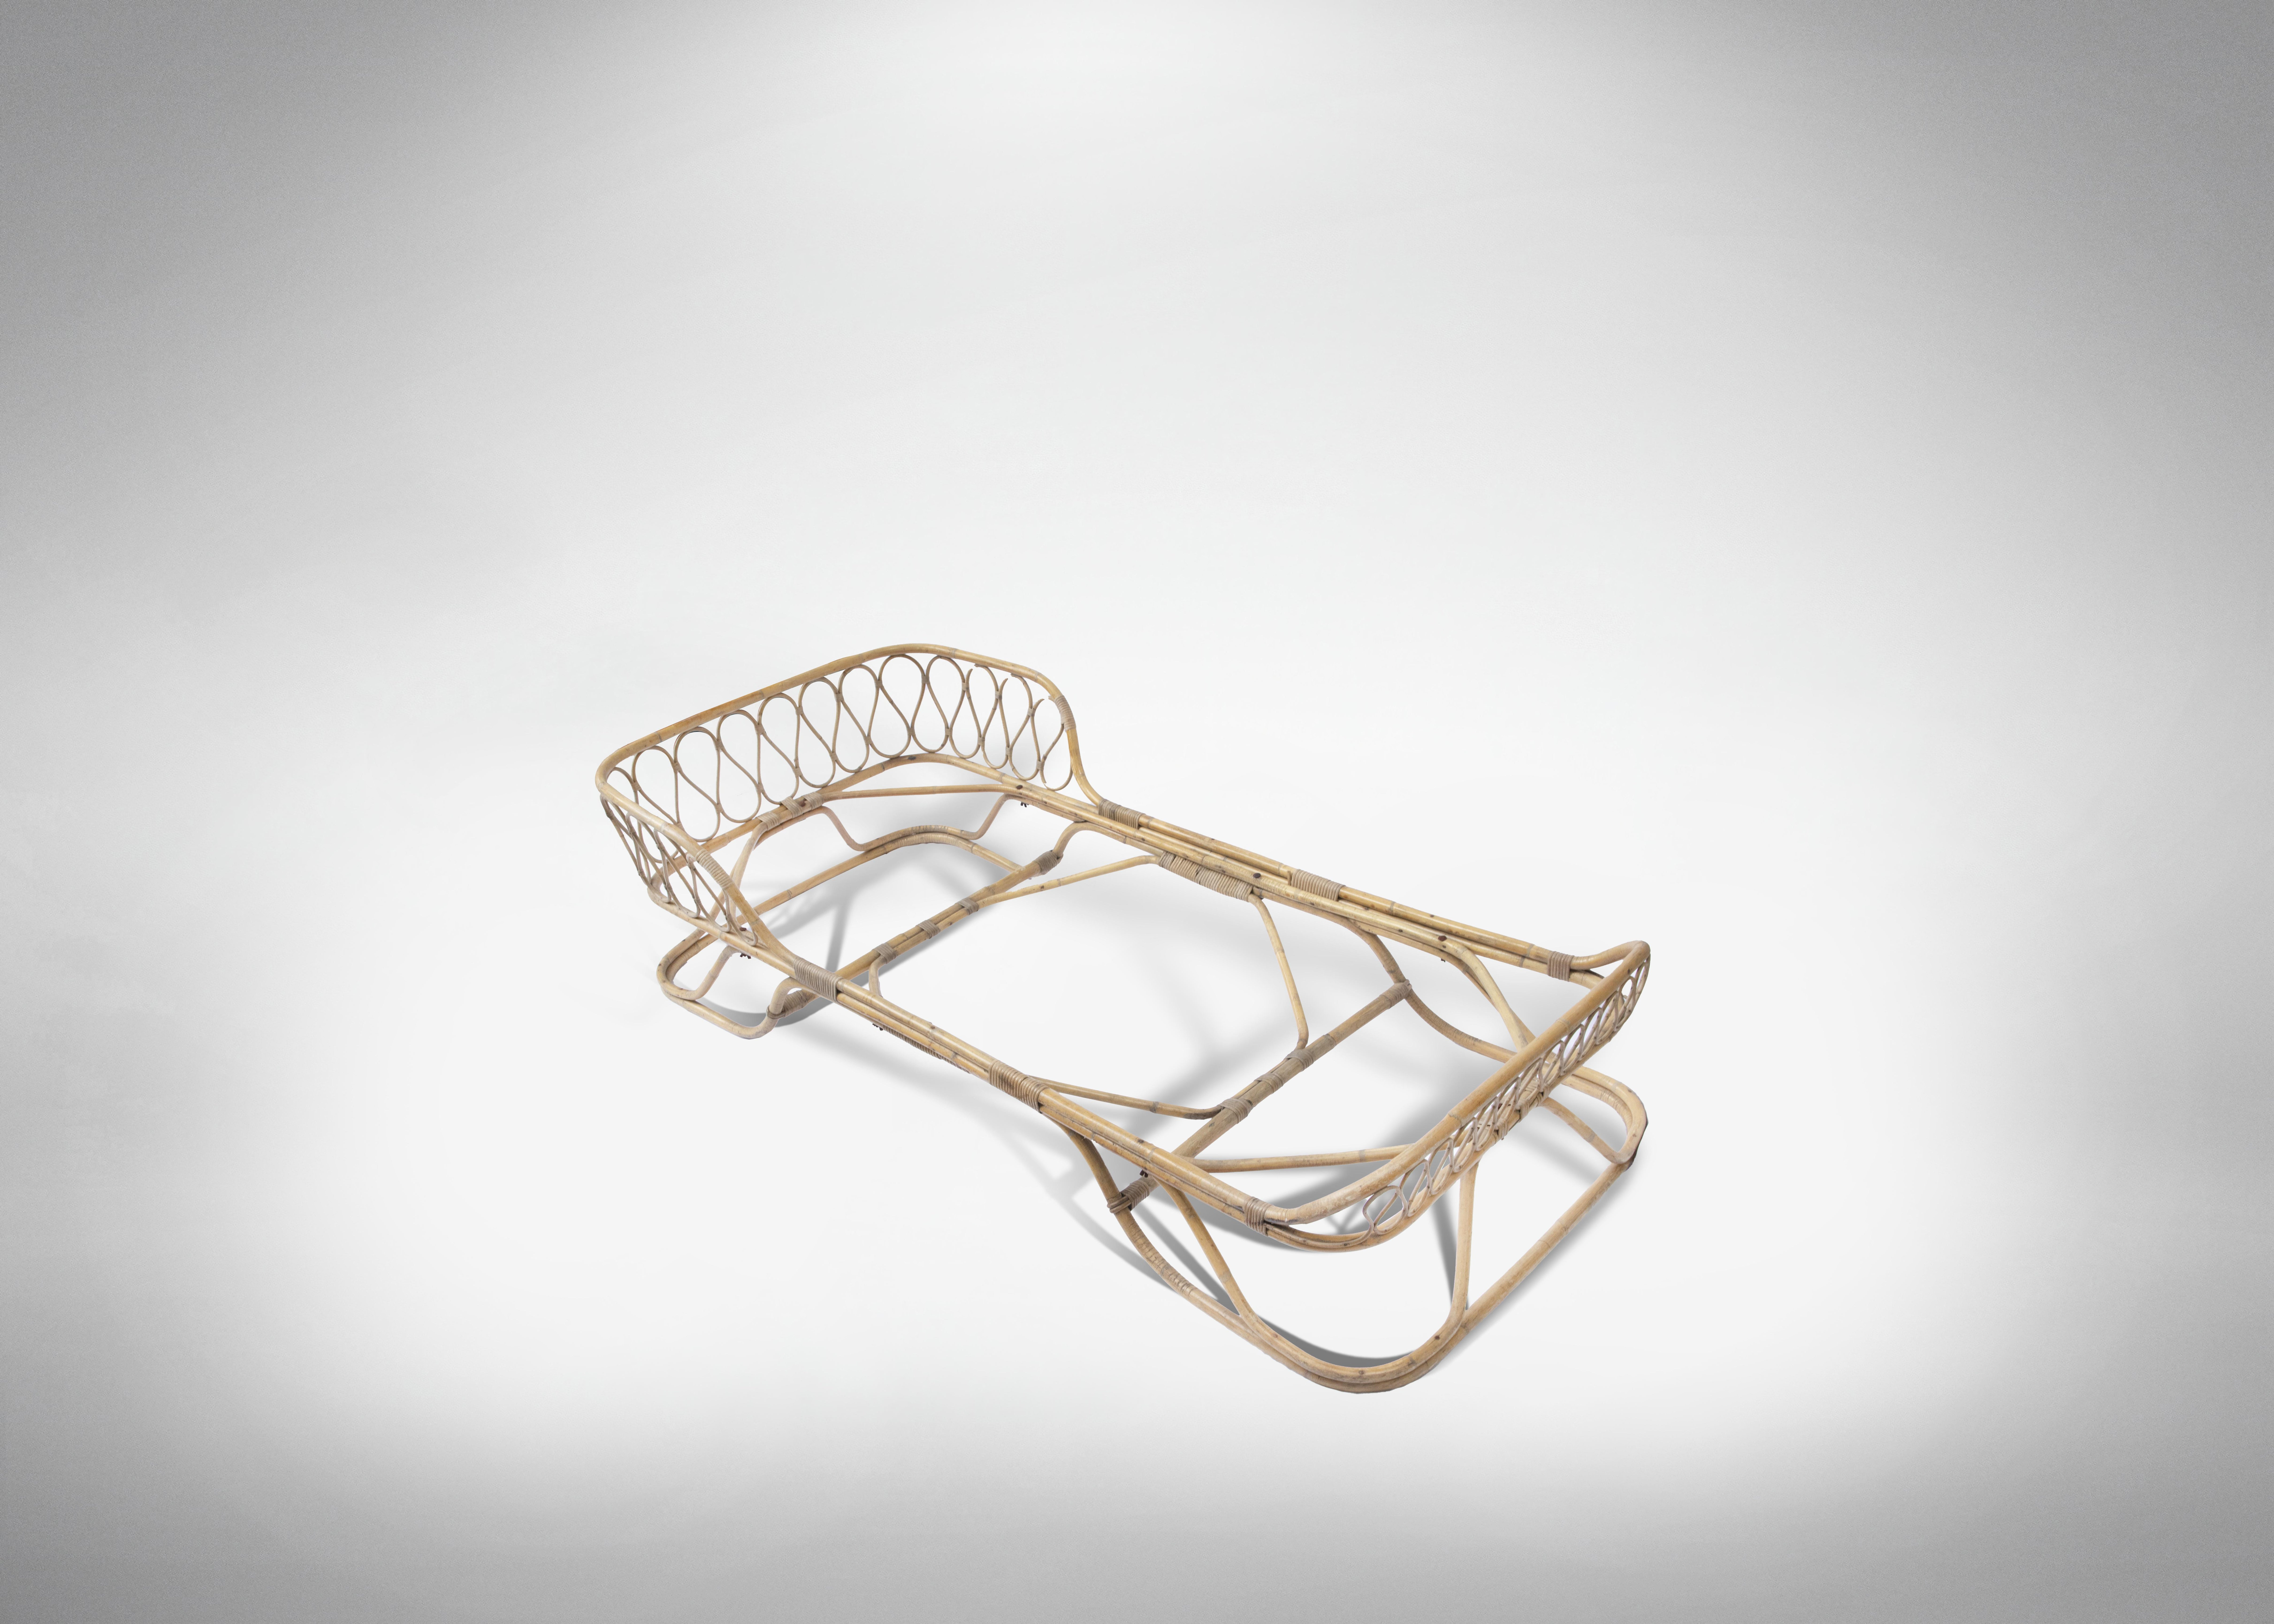 Rattan single bed attributed to Gio Ponti in bamboo and wicker, Italy, 1950s.

H.: 55 × 208 × 102 cm. 

Very good condition.